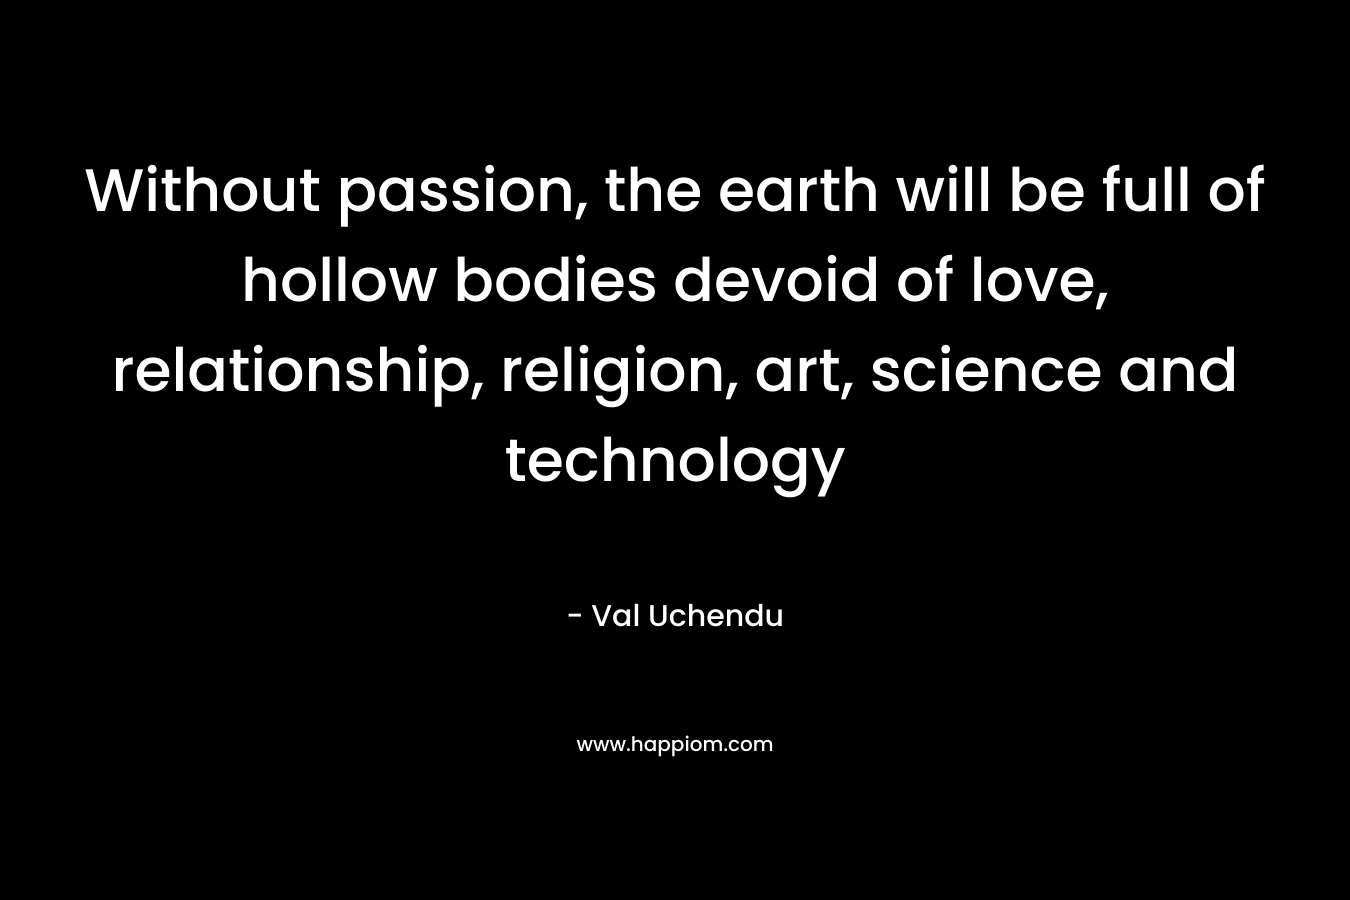 Without passion, the earth will be full of hollow bodies devoid of love, relationship, religion, art, science and technology